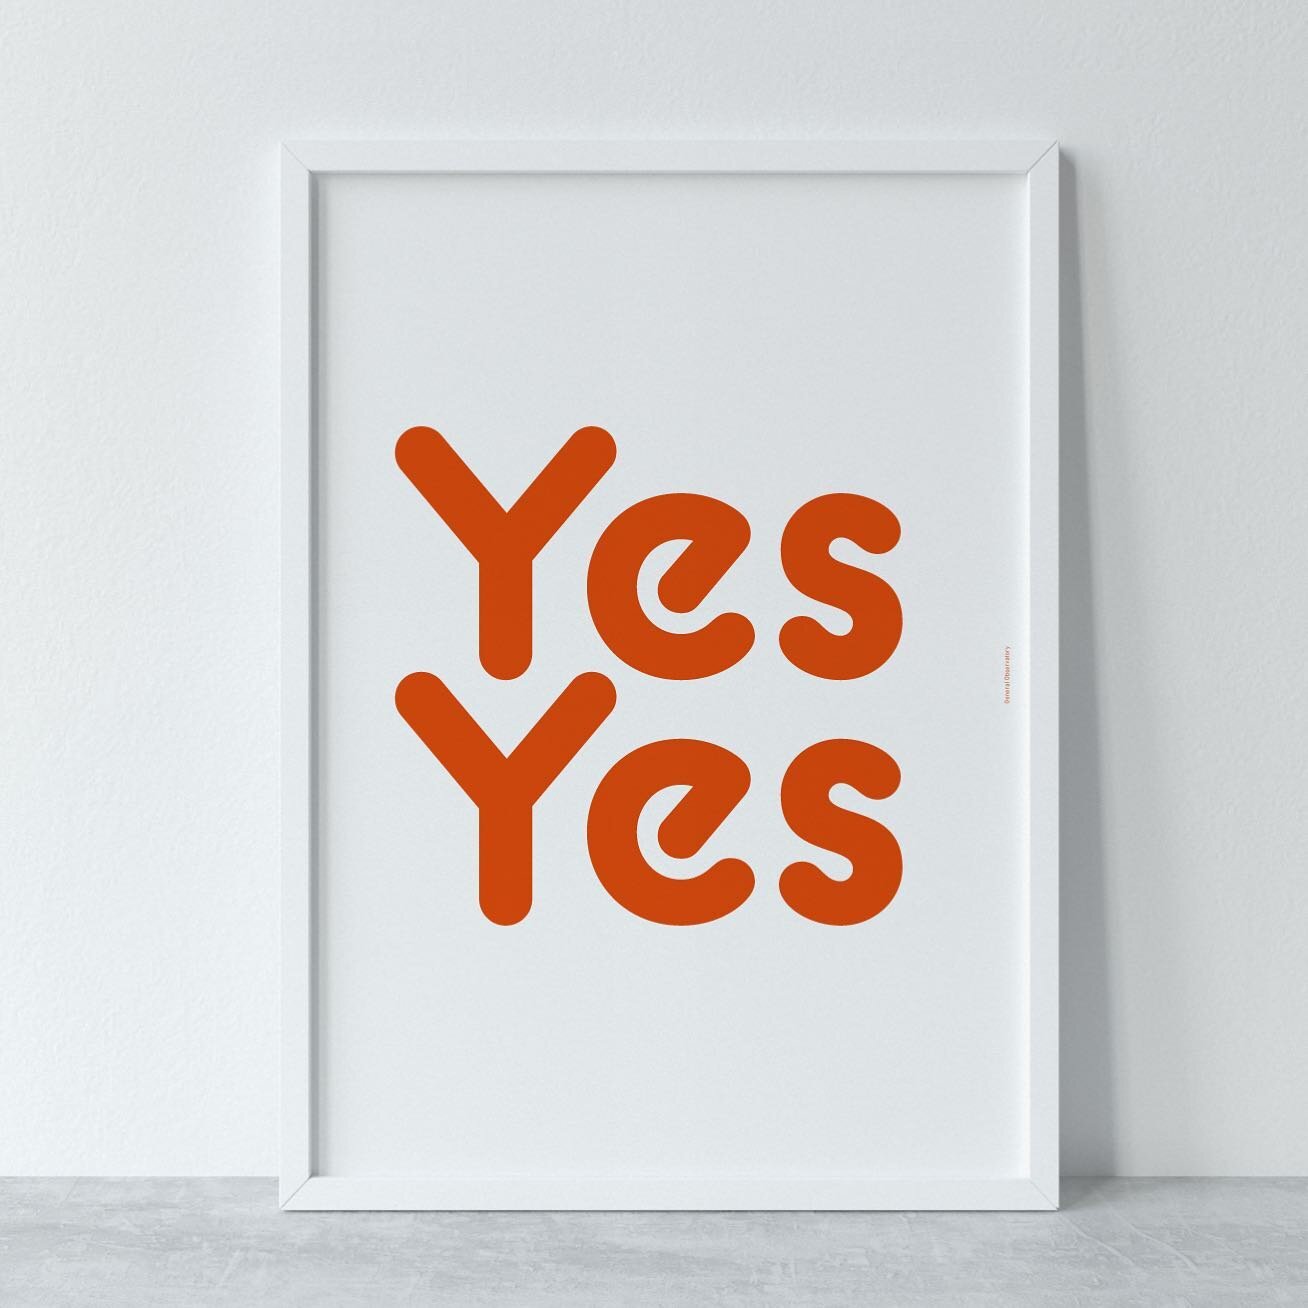 If it&rsquo;s worth saying... say it twice.
Yes Yes adds positives vibes to any wall. 
Printed at A2 (420x594mm) 190gsm matte finish. 
Link to shop in bio @generalobservatory 
.
.
.
#posterart #posterdesign #art #posters #artforyourhome #posterdesign